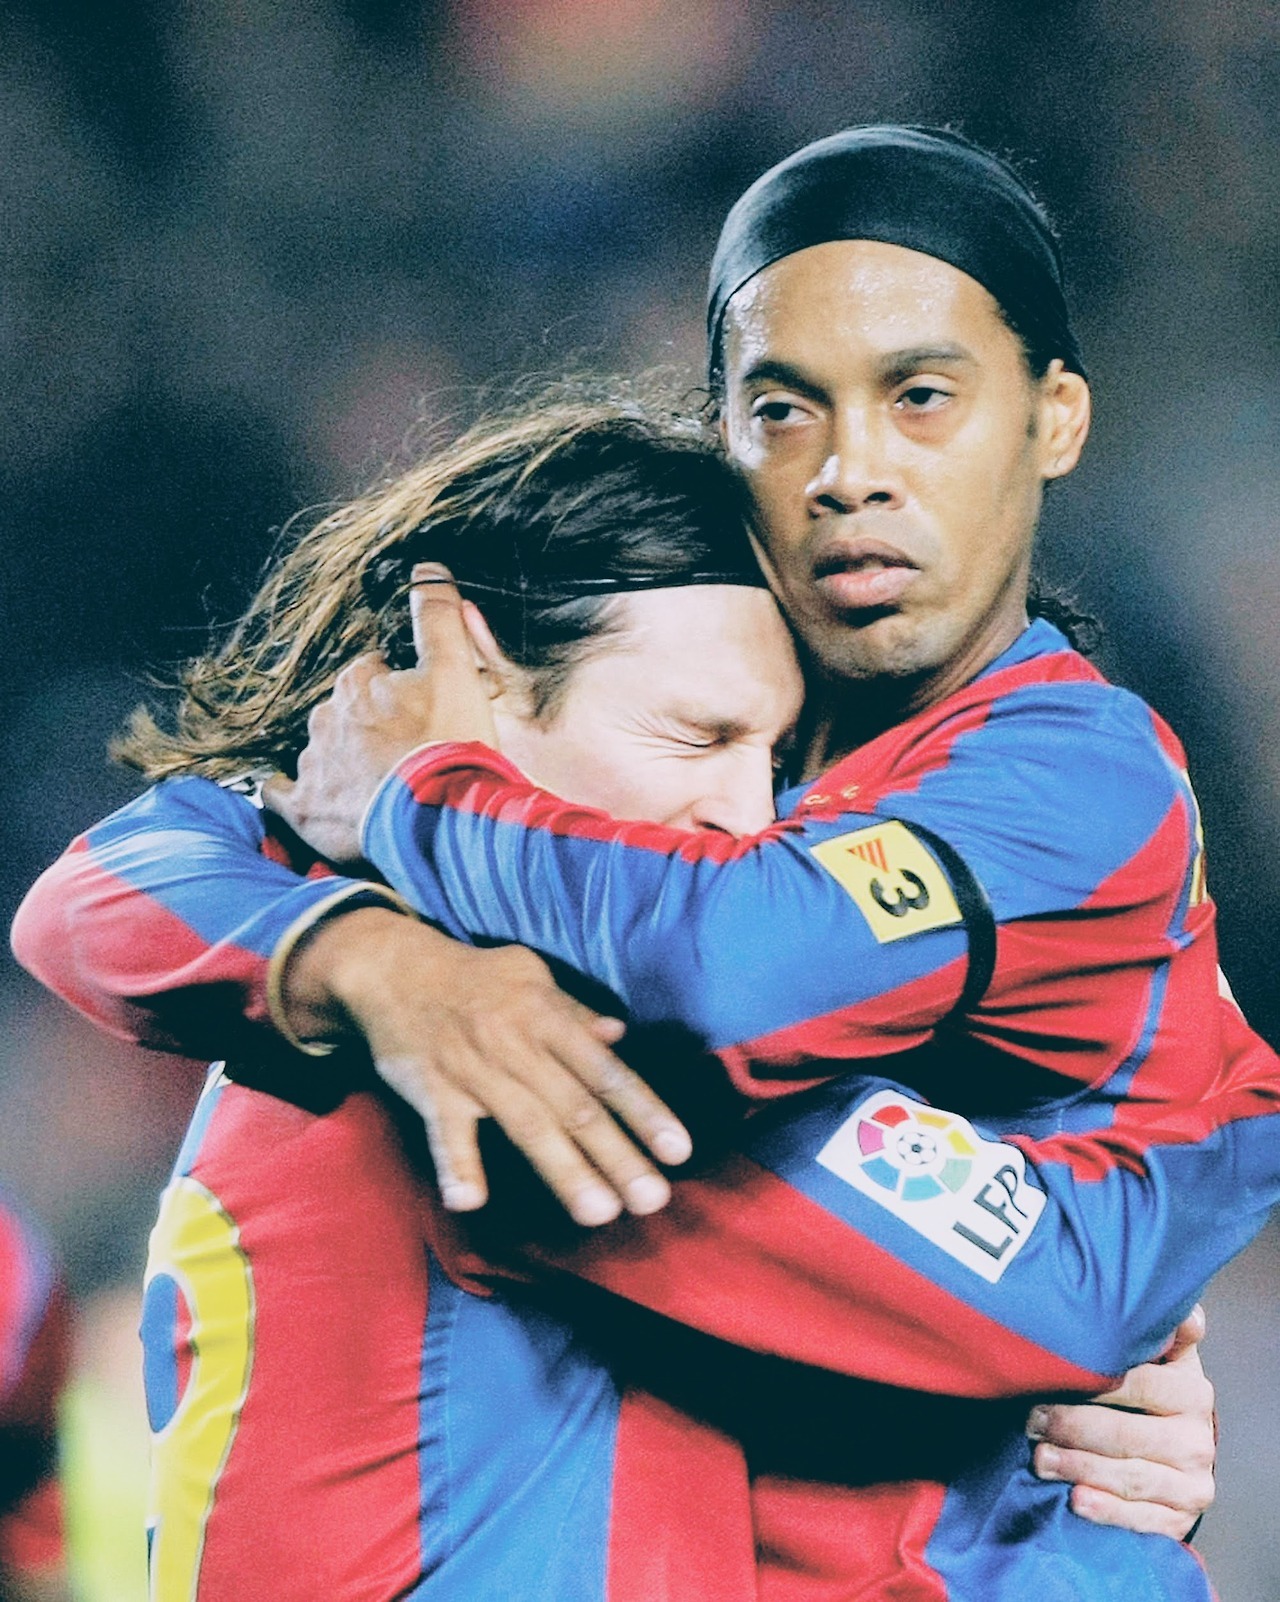 Sometimes, a Hug is Worth More Than Anything in Life: A Beautiful, Emotion-filled Image of Ronaldinho Embracing Messi After a Long-awaited Reunion" 4